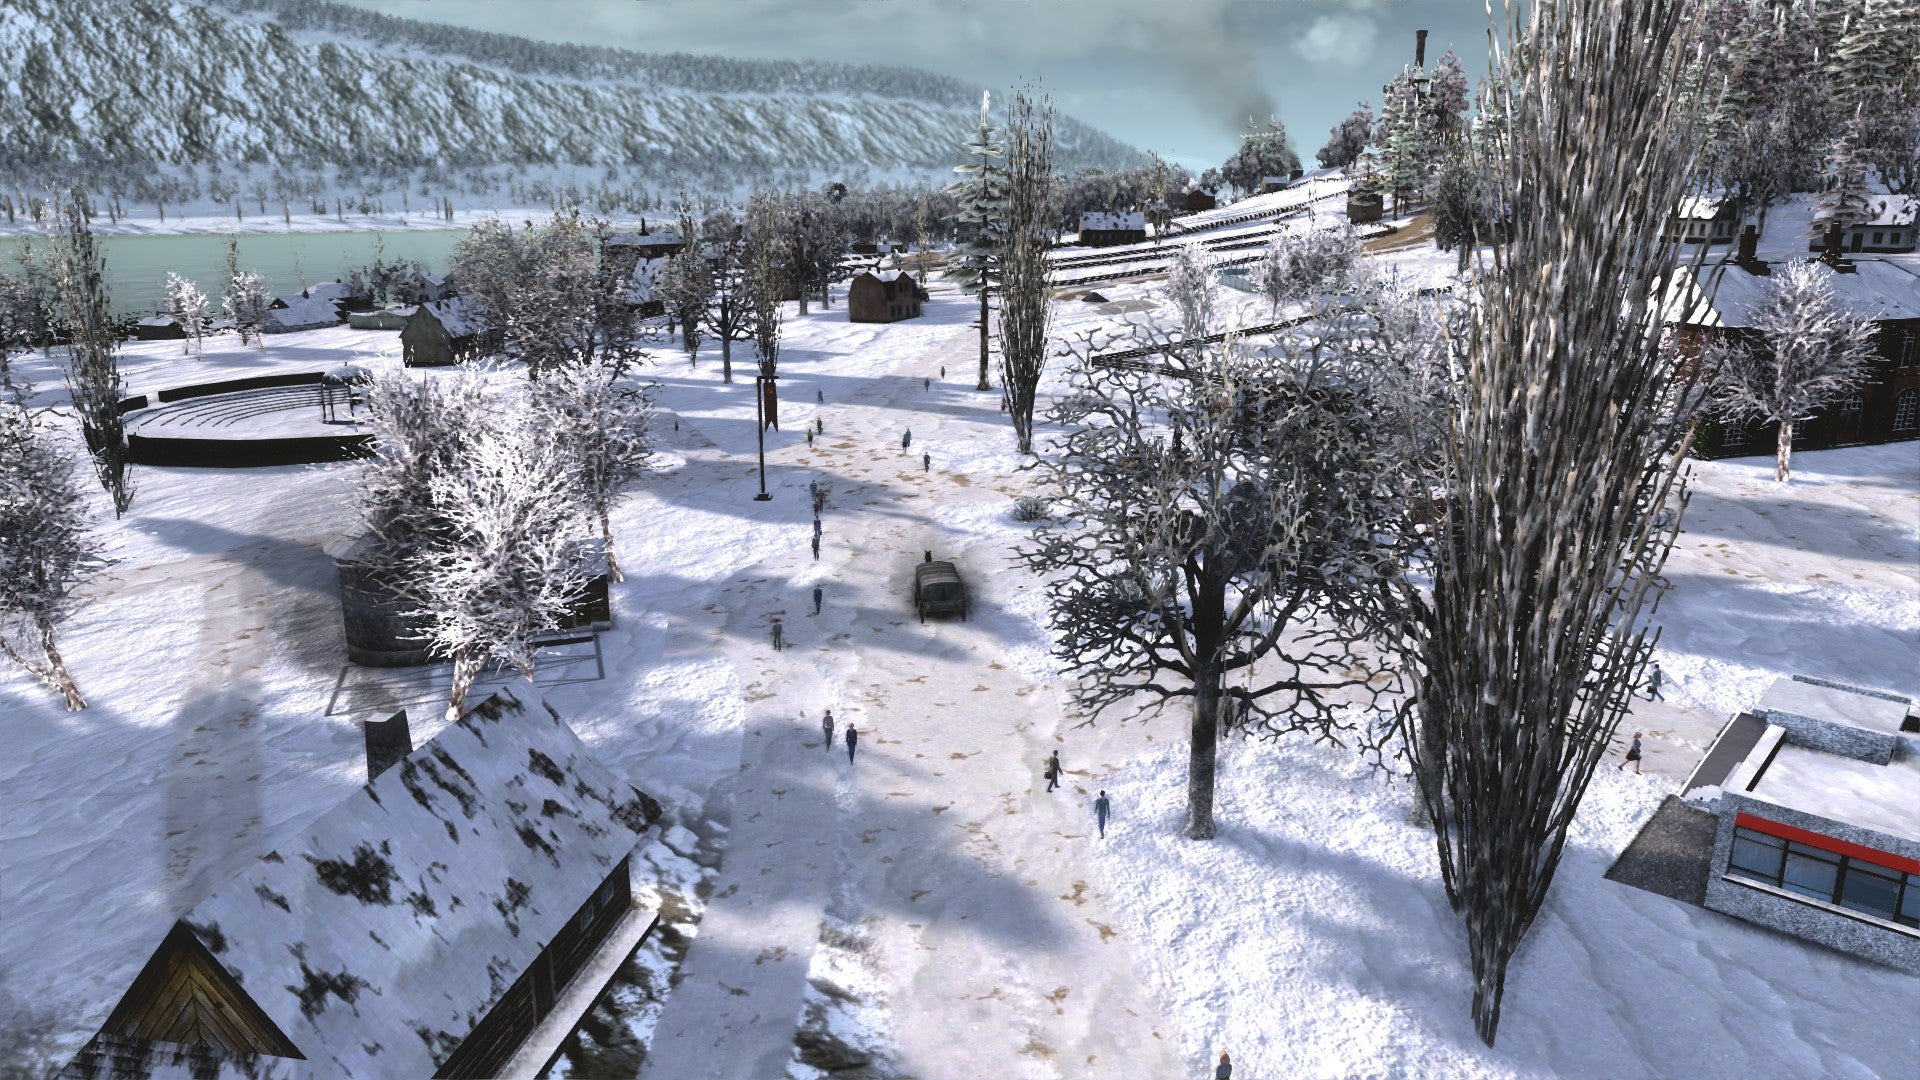 A snowy rural scene from Workers & Resources: Soviet Republic